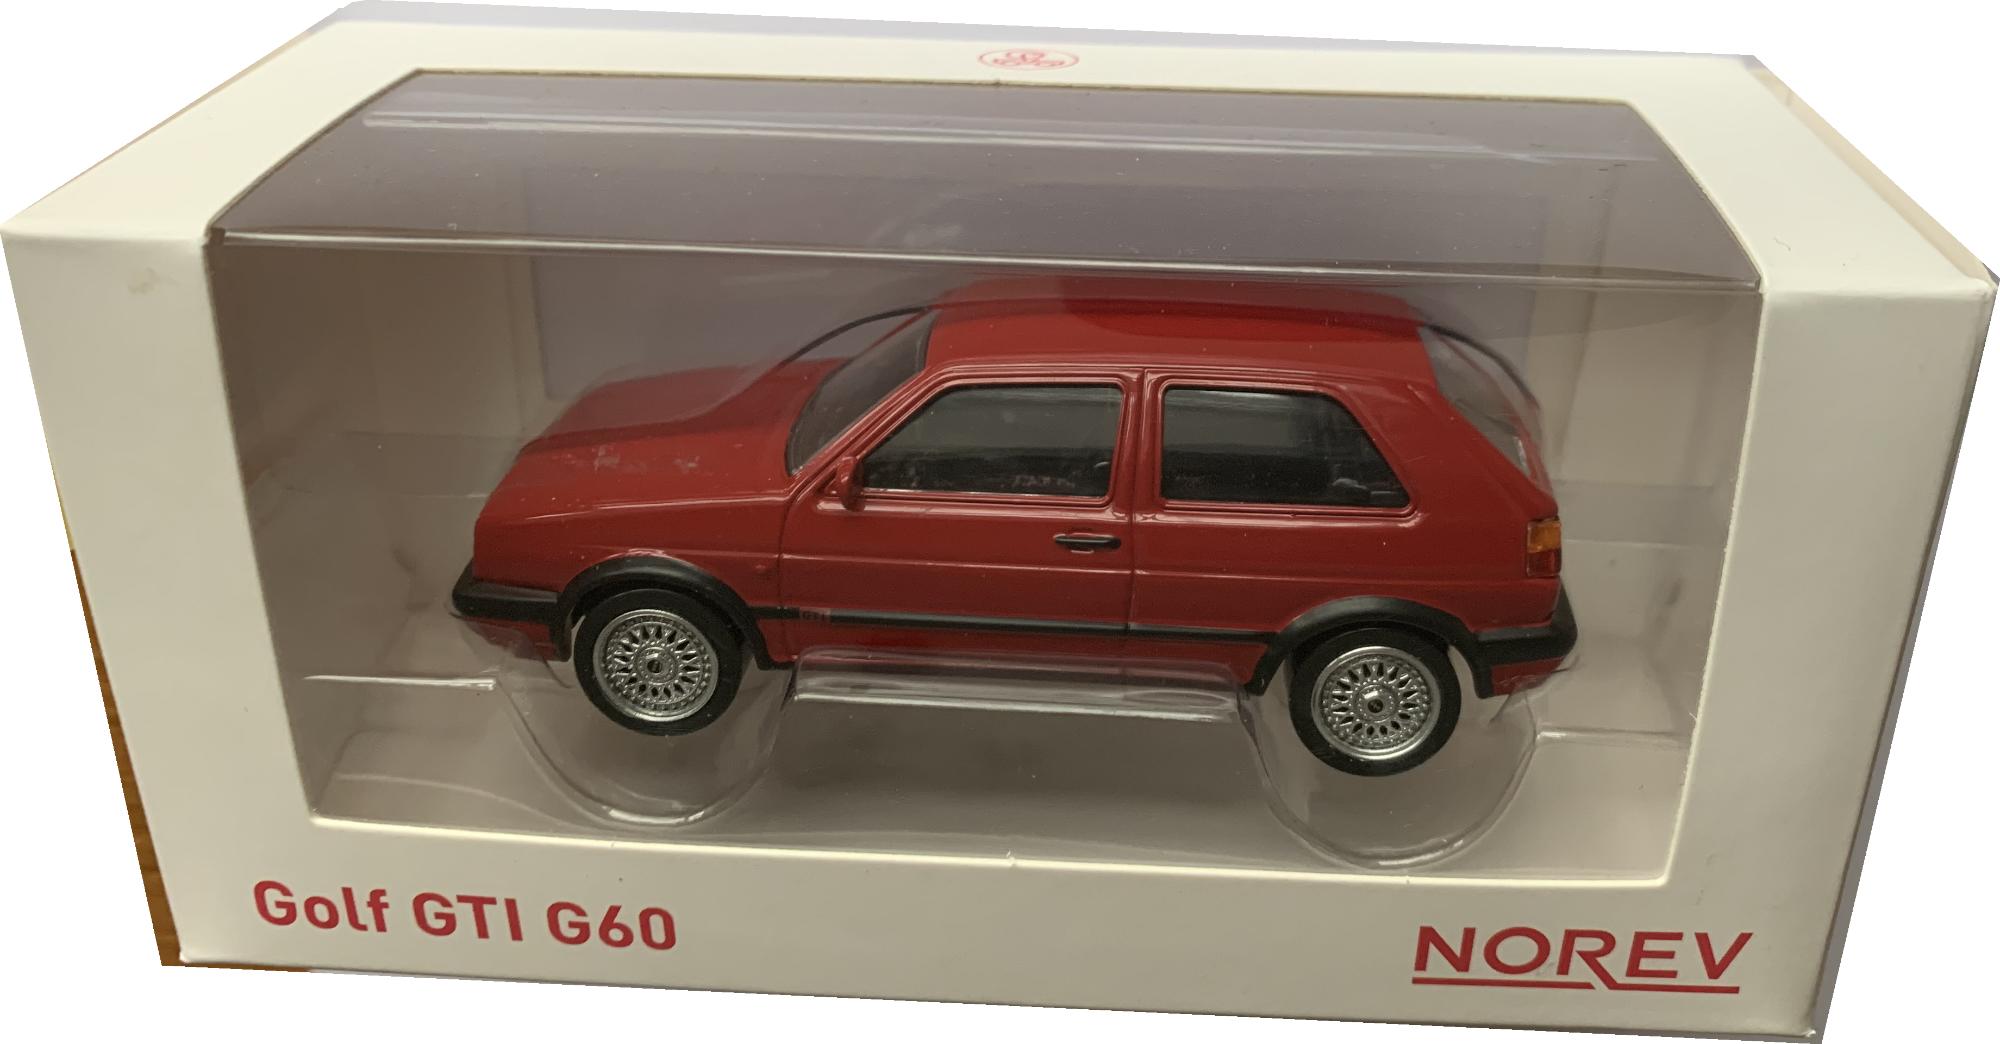 A good replica of the VW Golf GTI decorated in red with silver wheels